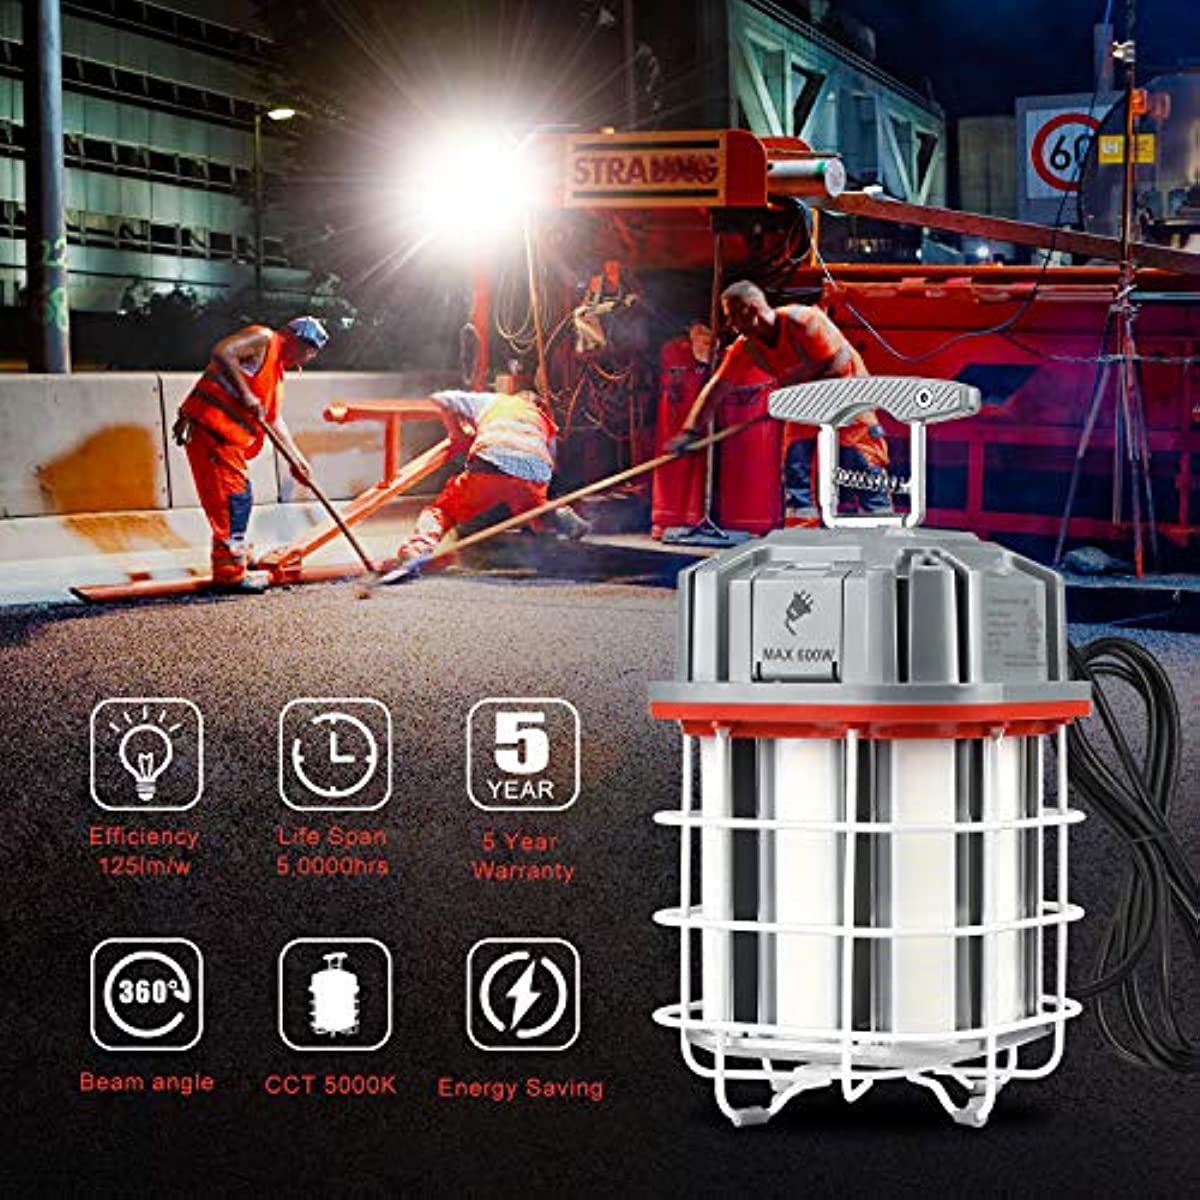 100w Led Temporary Work Light 14 500lm 360 Lighting Etl Listed 10 Cable  With 120v Plug Portable Hanging Construction Work Lights With On Off Switch  For Job Site Warehouse Garage Shop Area